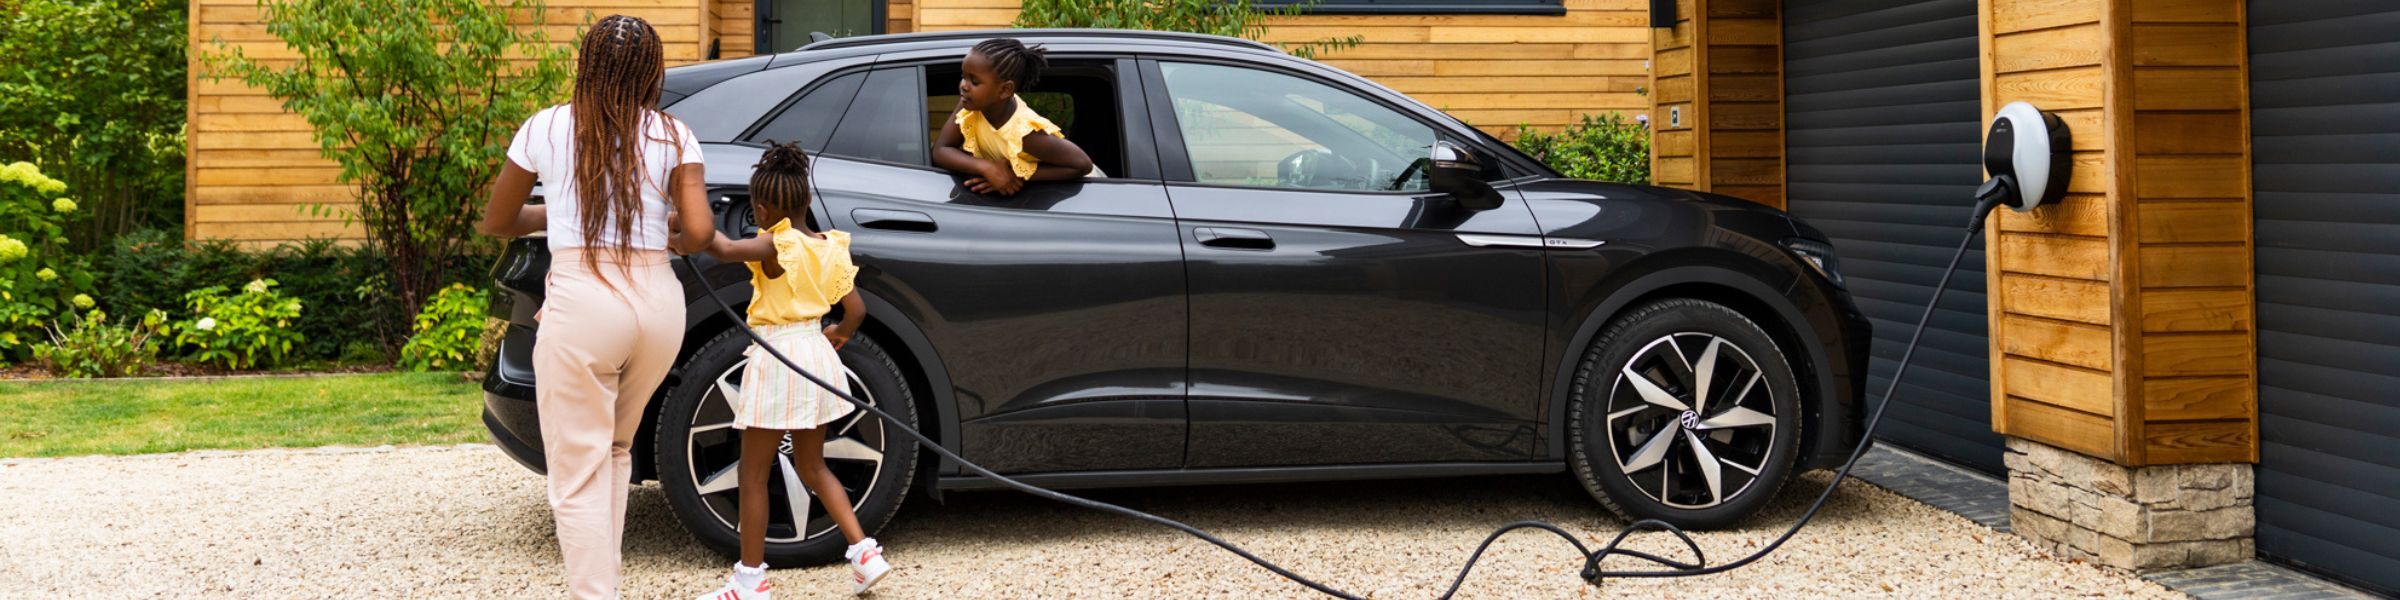 What are the most common questions EV drivers get asked?